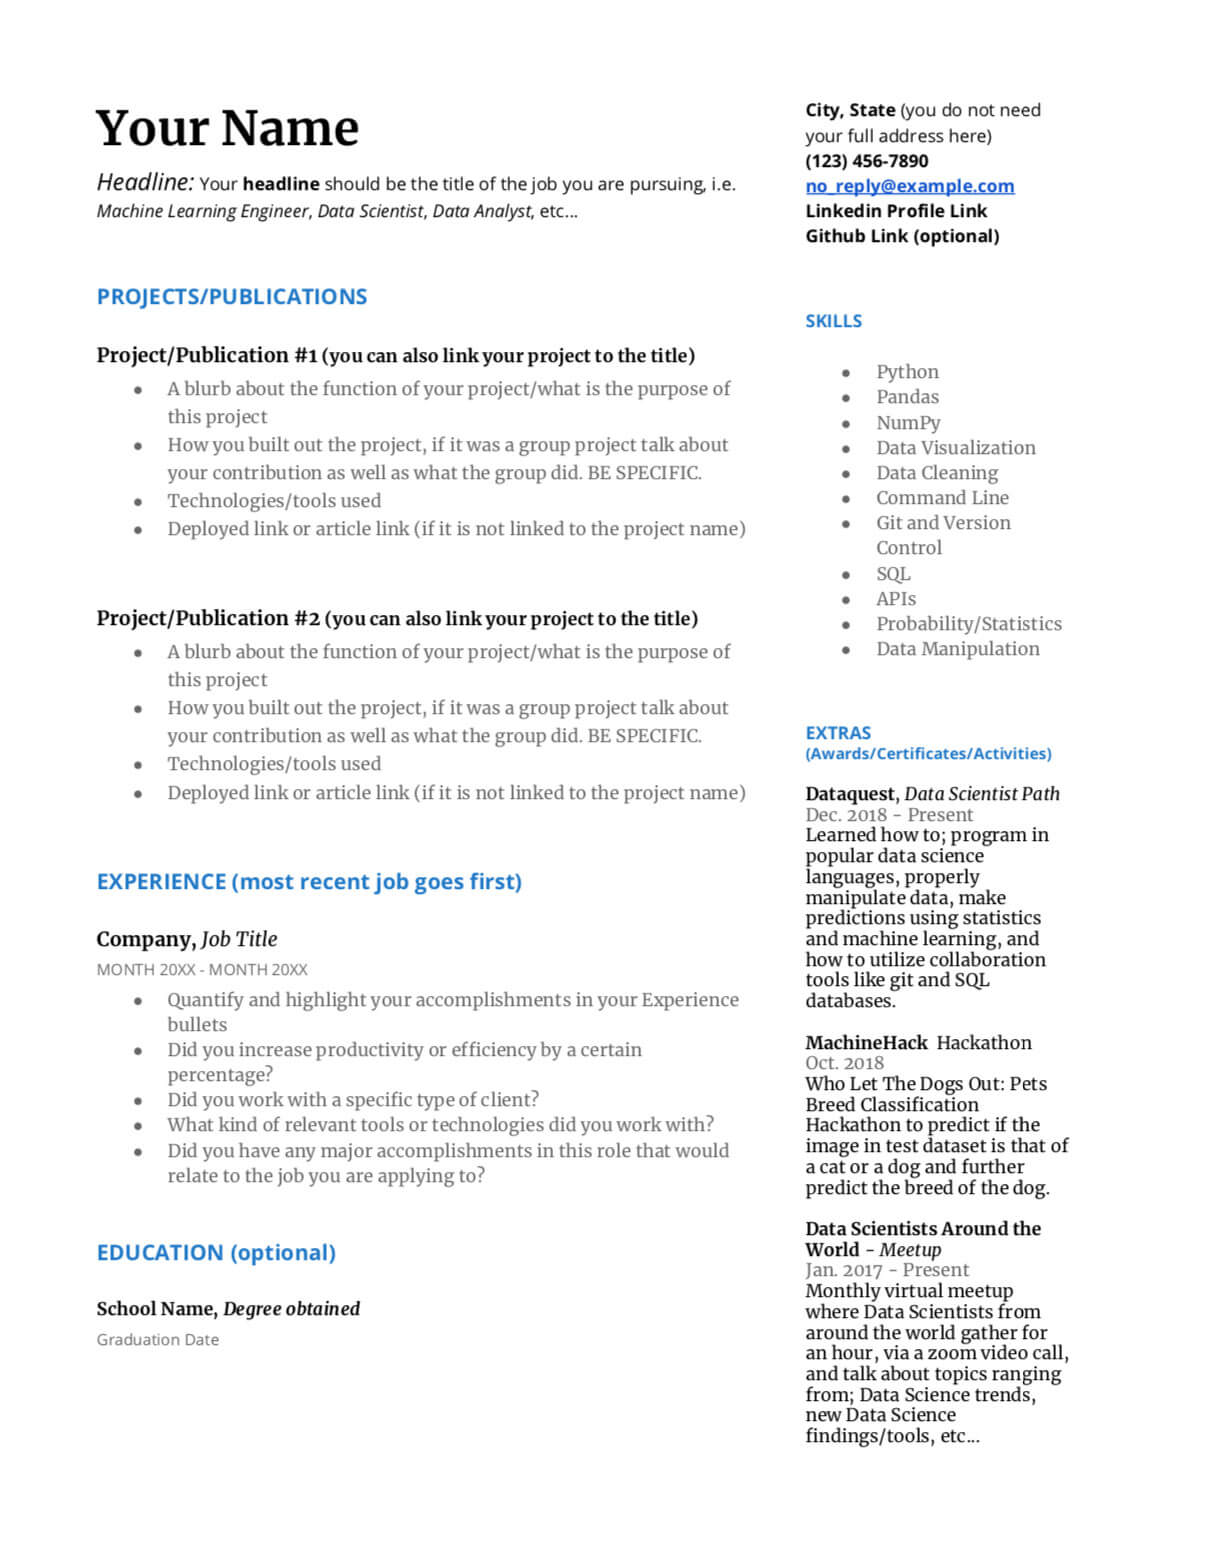 How Long Should A Resume Be Data Science Resume Template 1 how long should a resume be|wikiresume.com